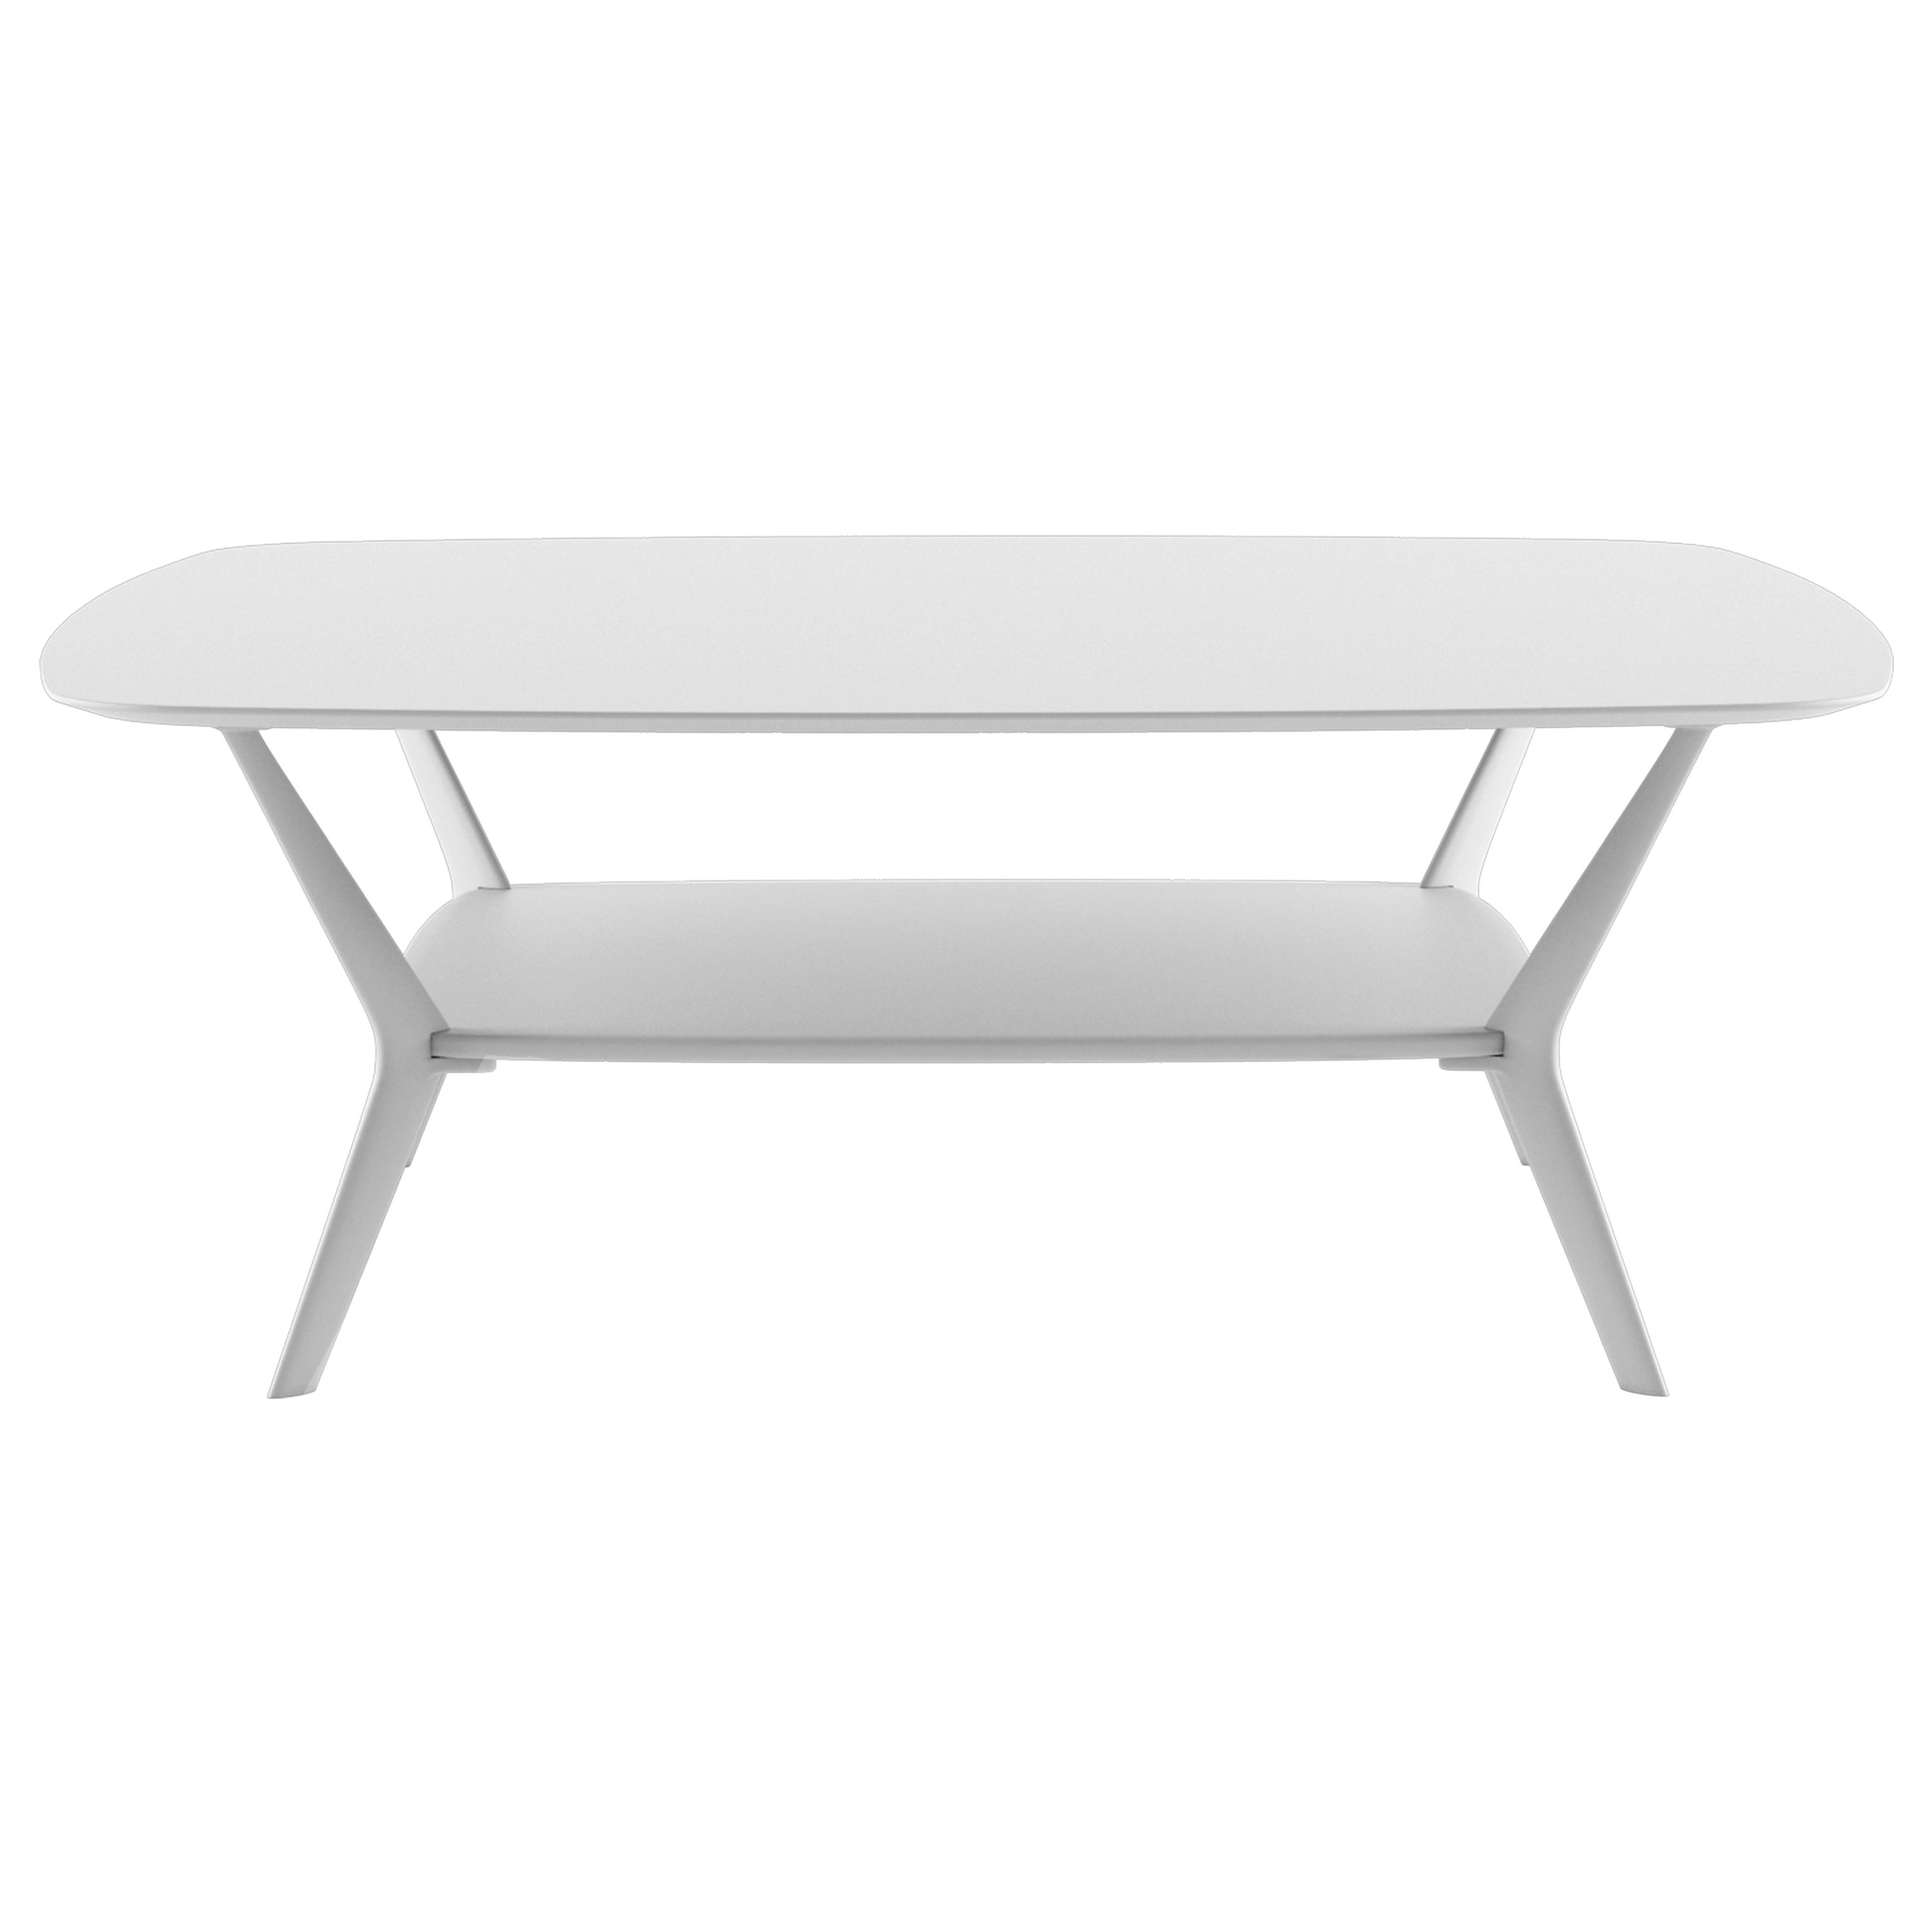 Alias B04 Biplane XS 95x95 Outdoor Table in White Top and Lacquered Frame For Sale